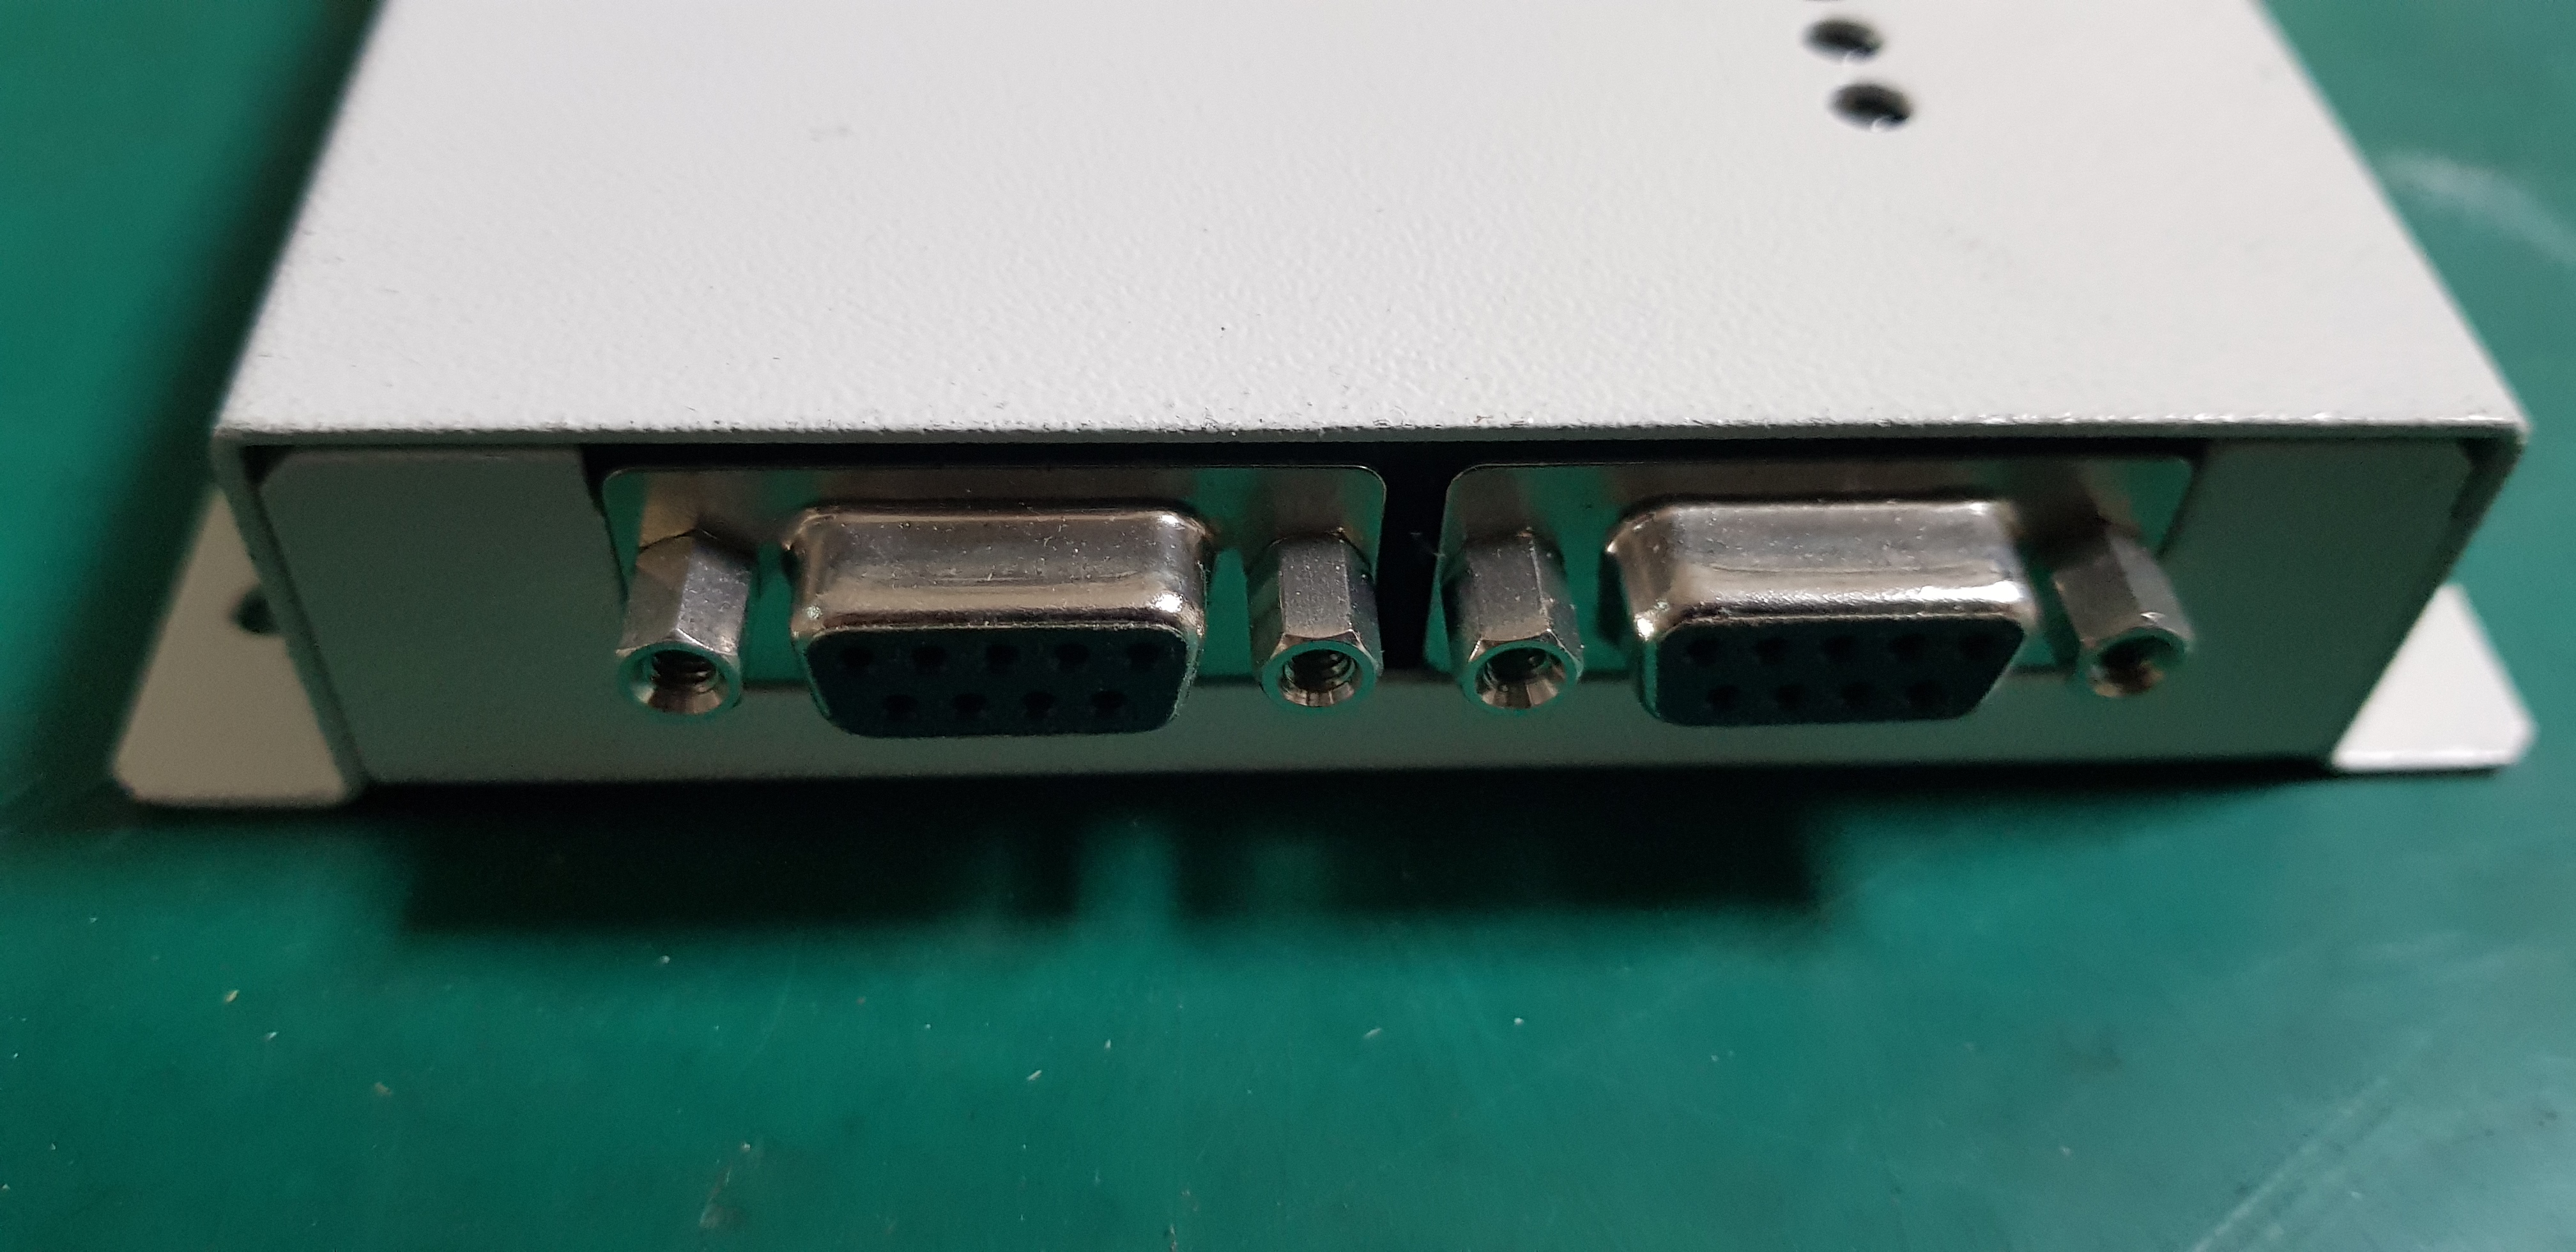 RS232C CONNECTOR DUAL TYPE